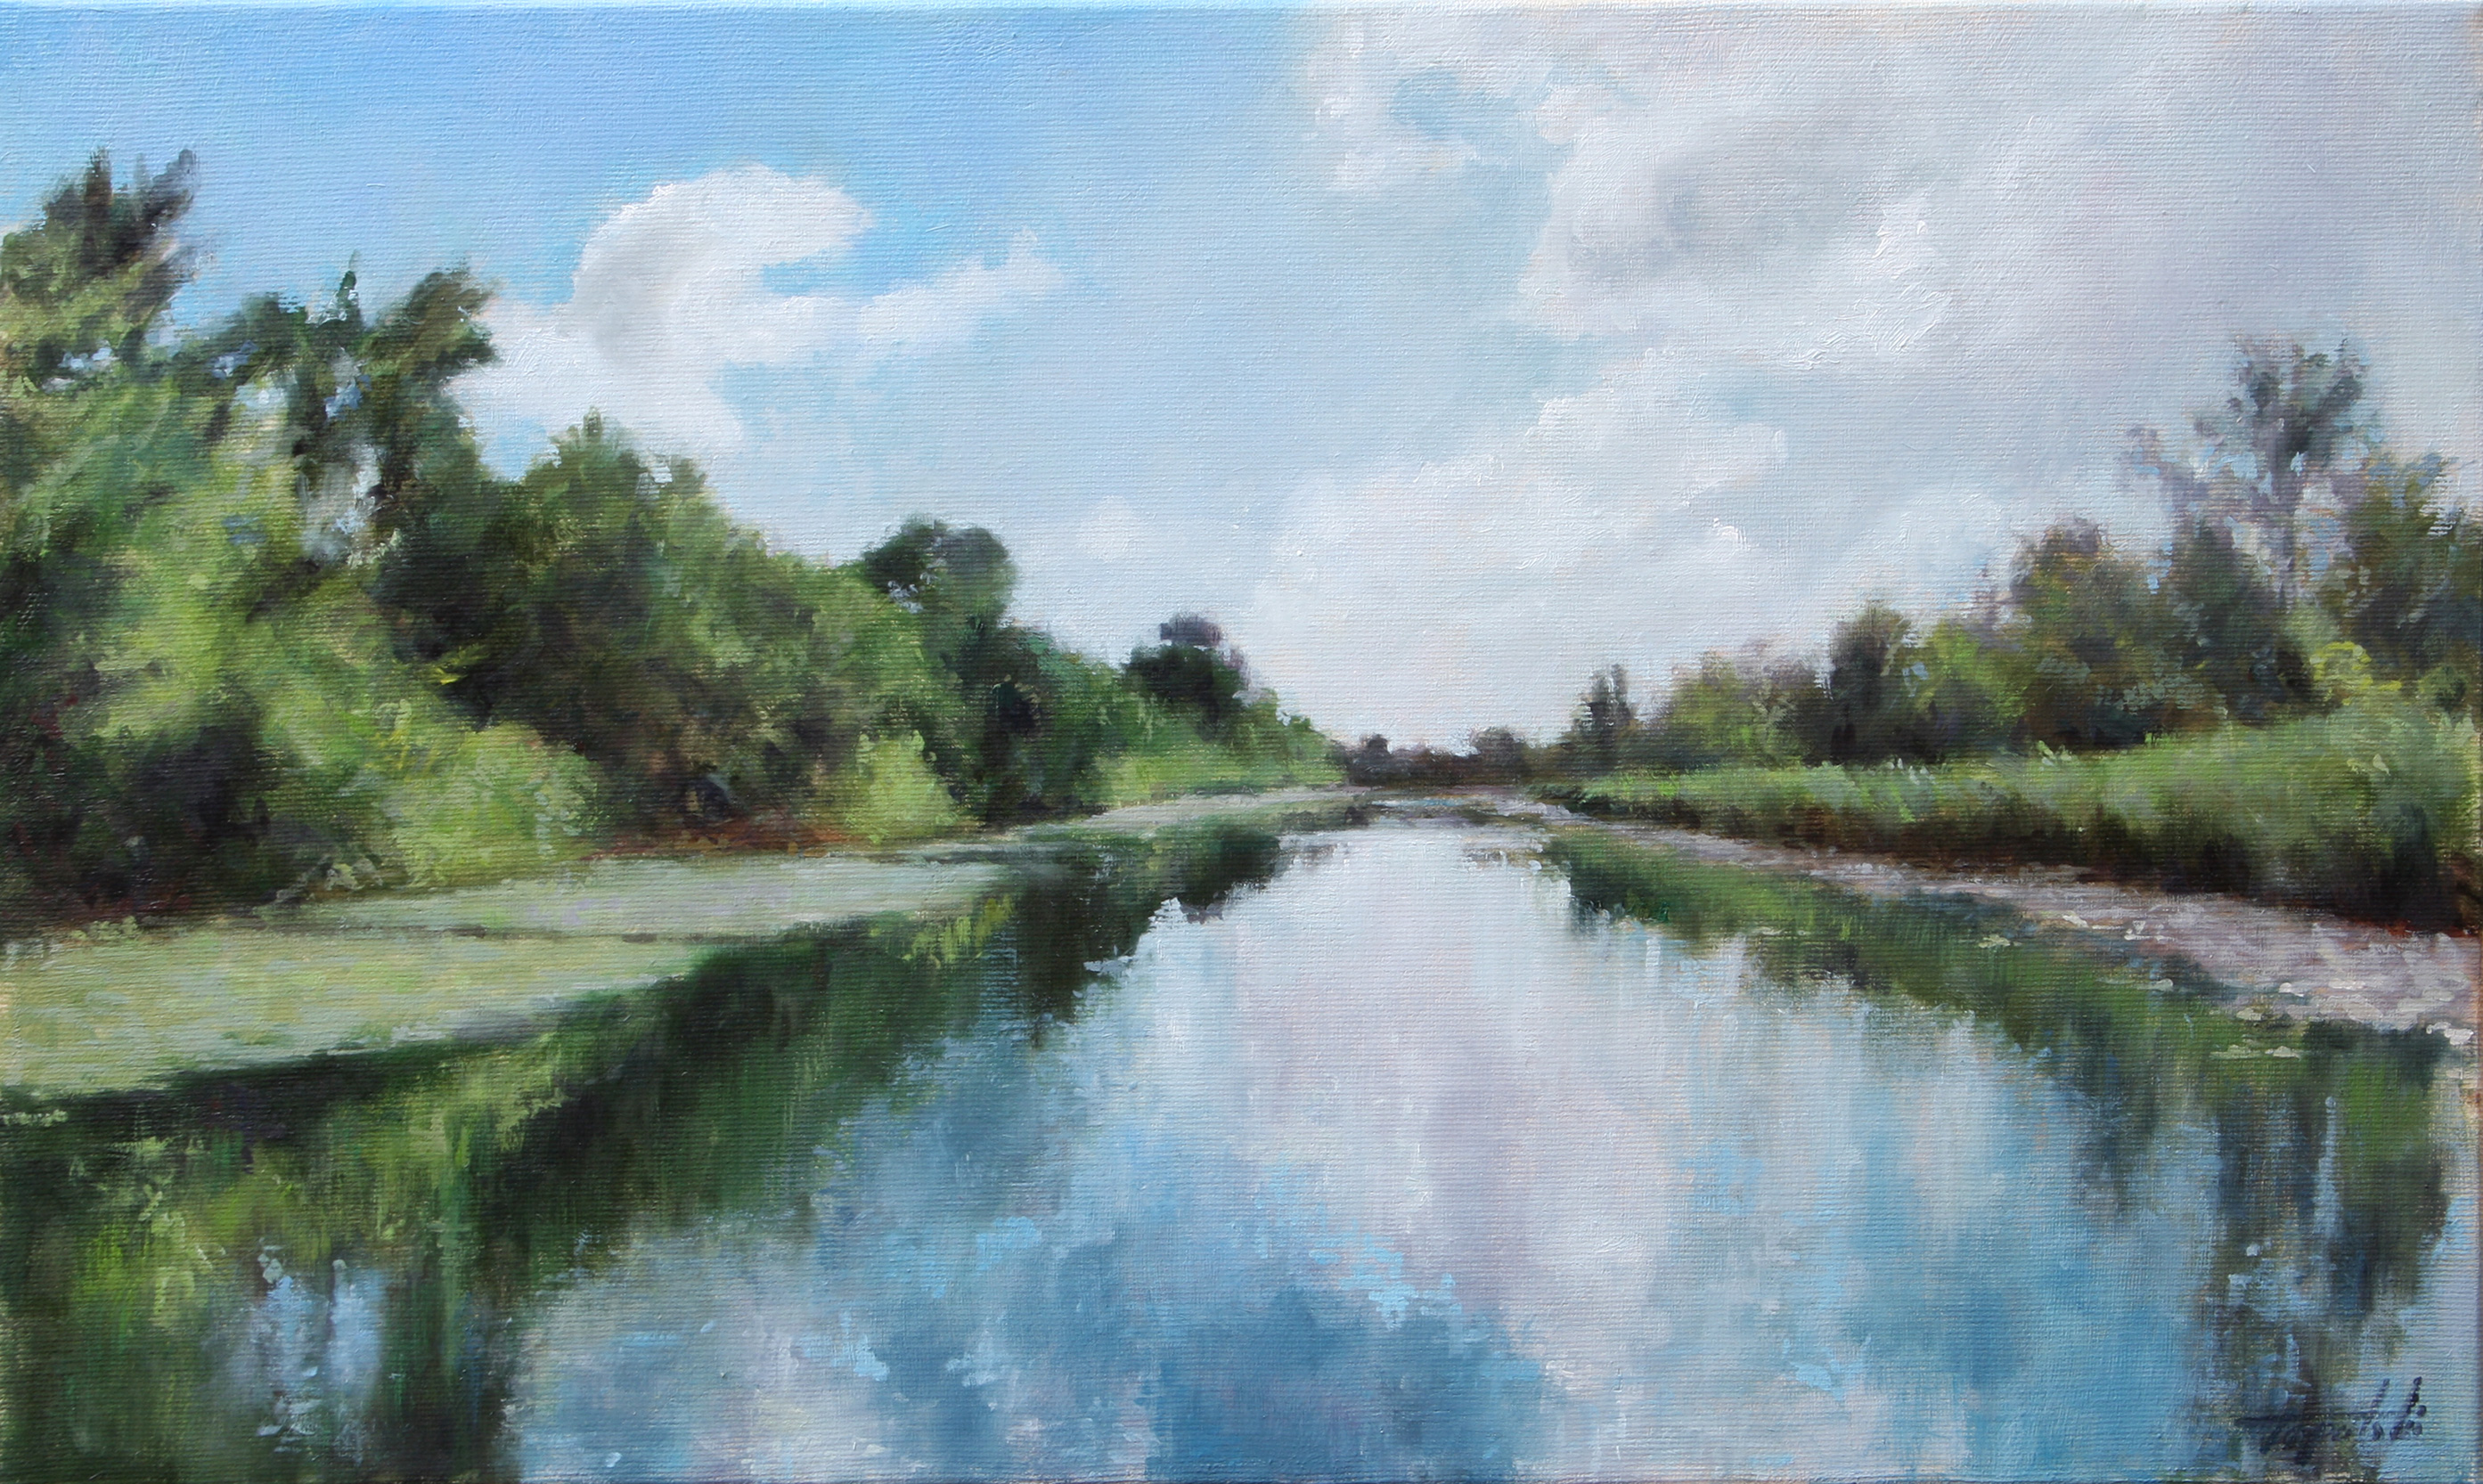 Canal Reflections – Landscape Oil painting | Fine Arts Gallery ...